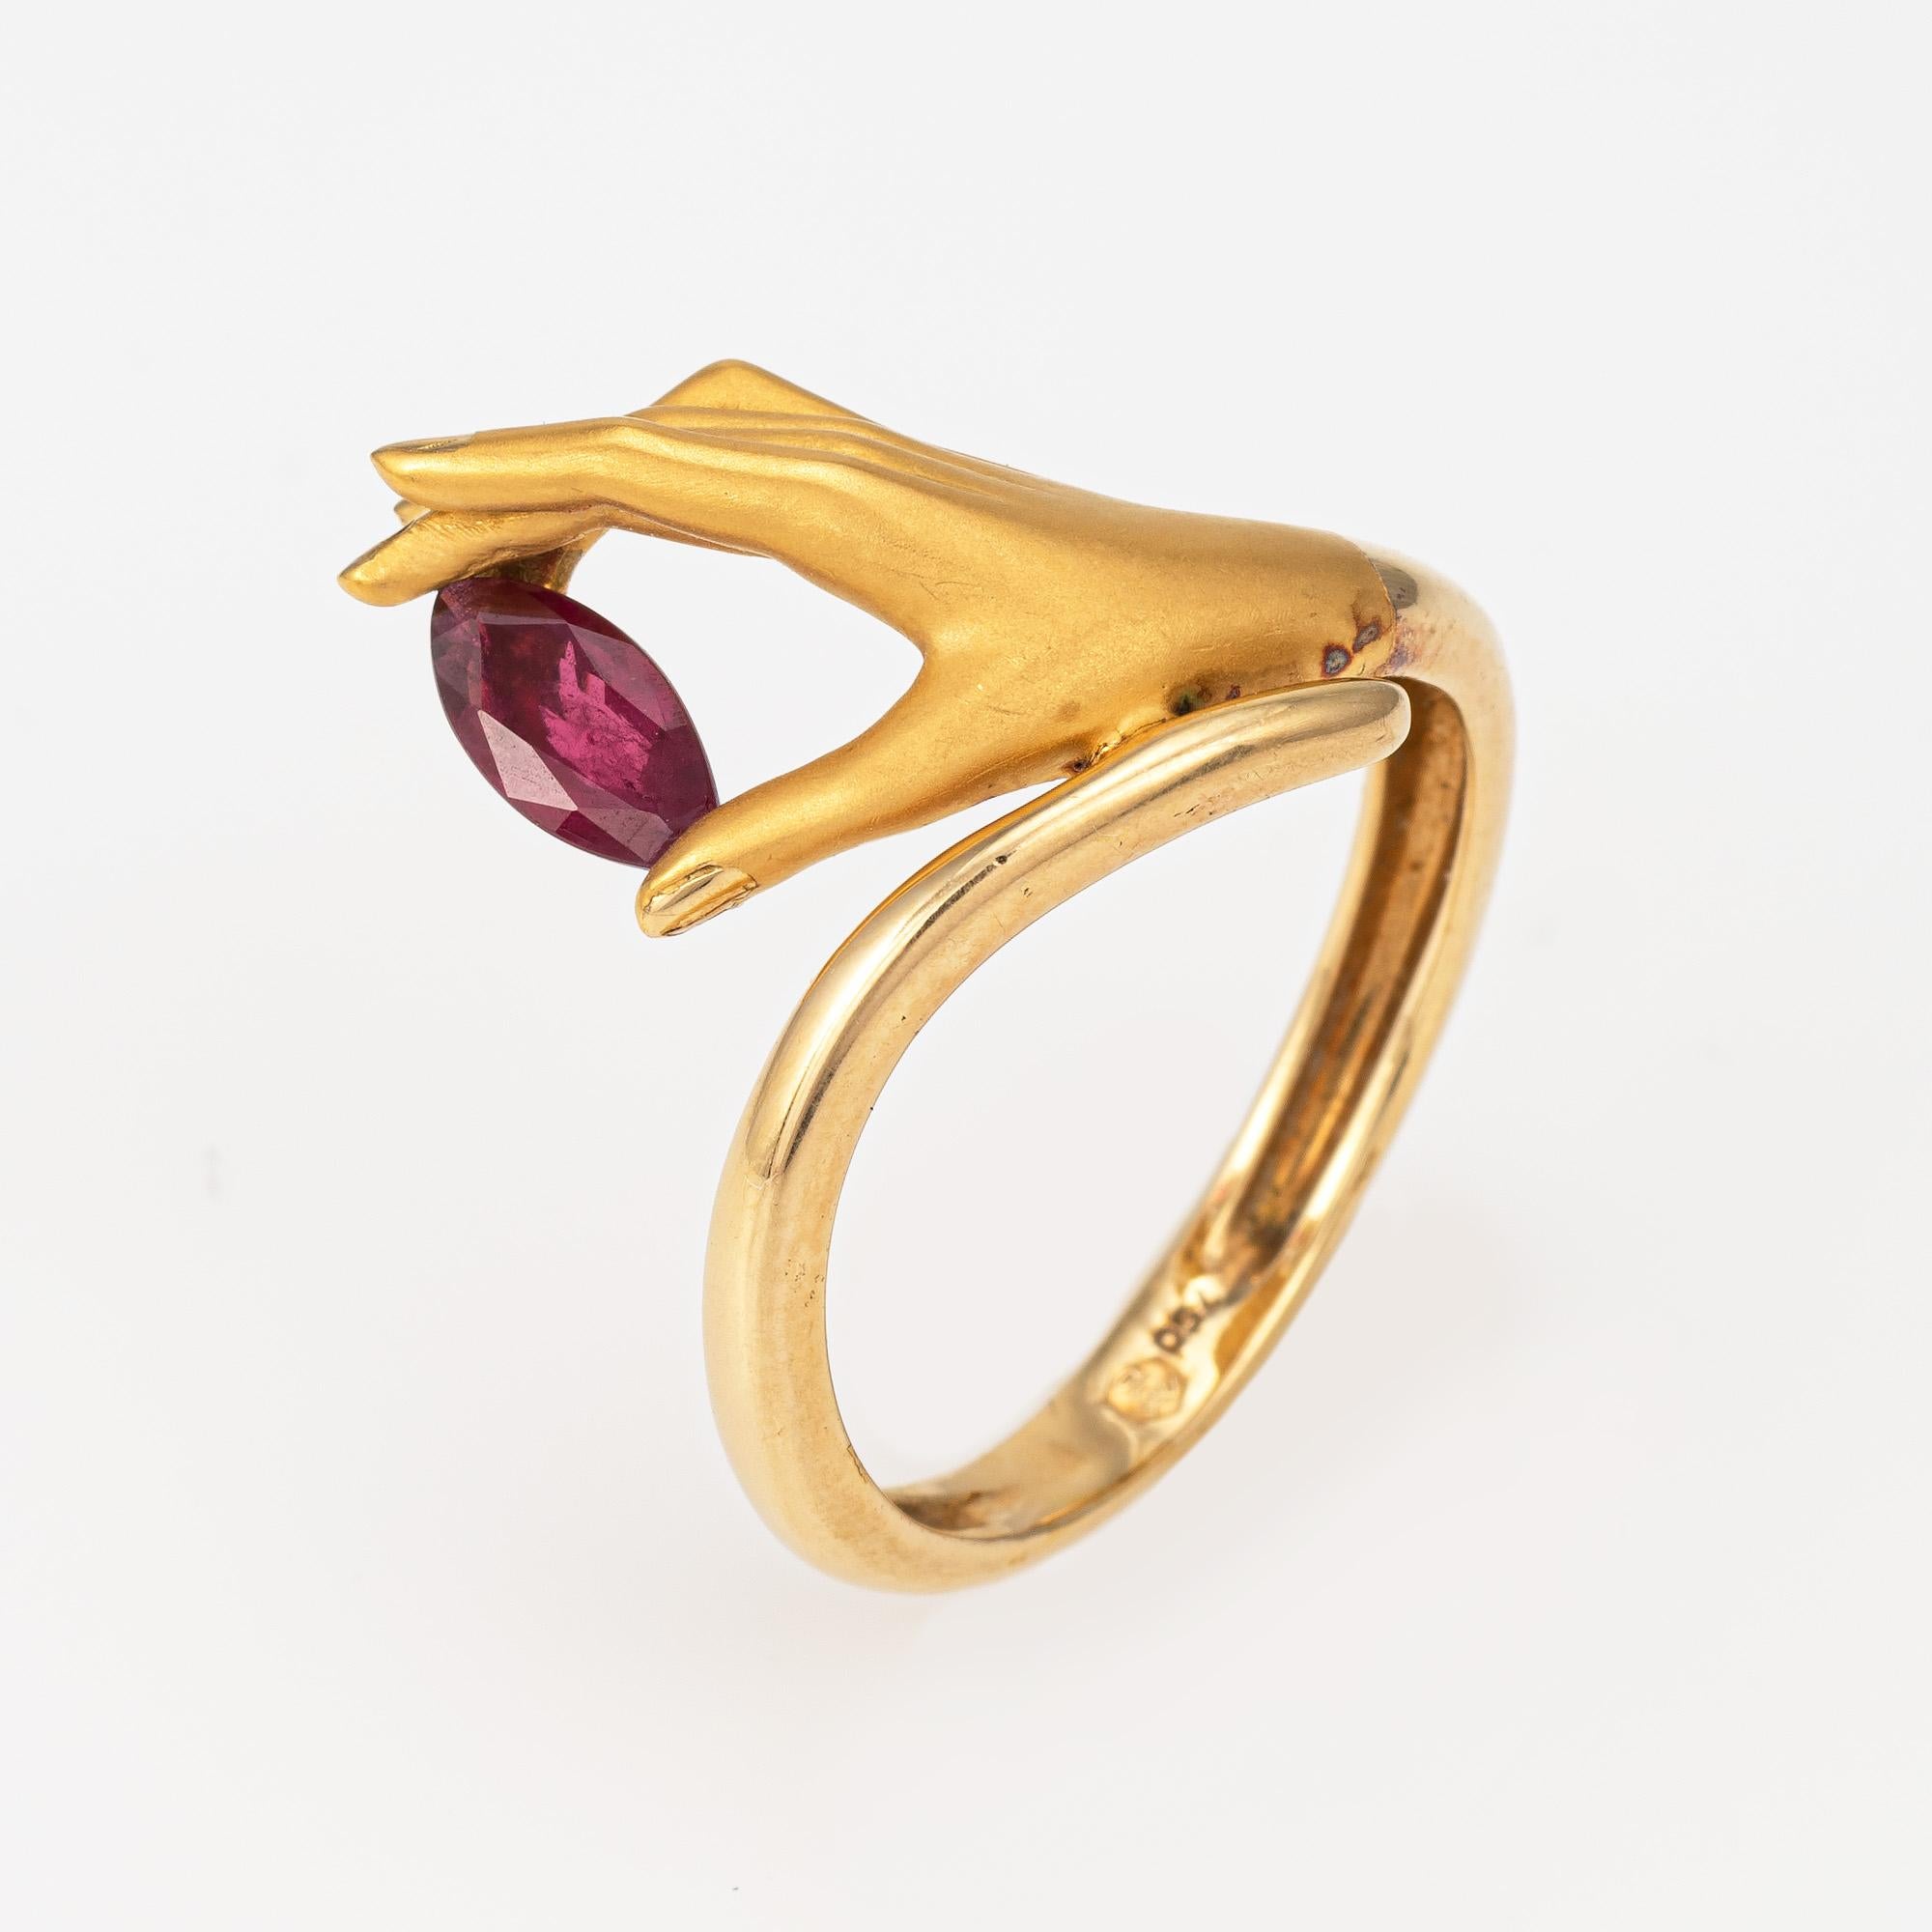 Estate Carrera y Carrera ruby hand ring crafted in 18 karat yellow gold.  

Marquise cut ruby measures 6mm x 3.5mm. The ruby is in very good condition and free of cracks or chips.

The beautifully detailed ring highlights an elegant hand in matte